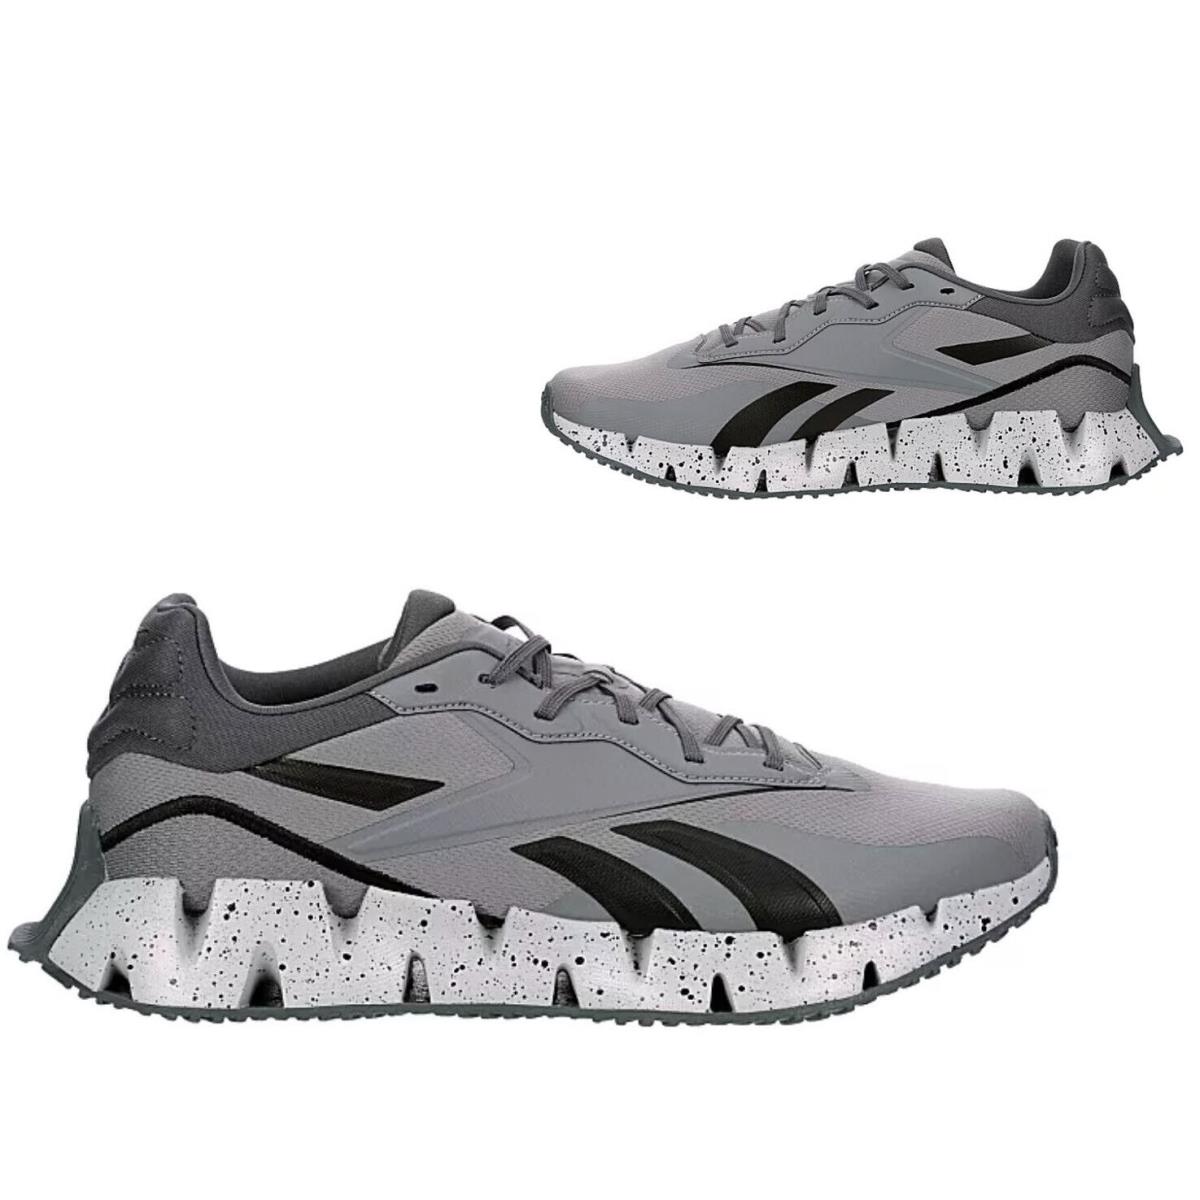 Reebok Athletic Sneakers Mens Casual Shoes Gray Black Size 13